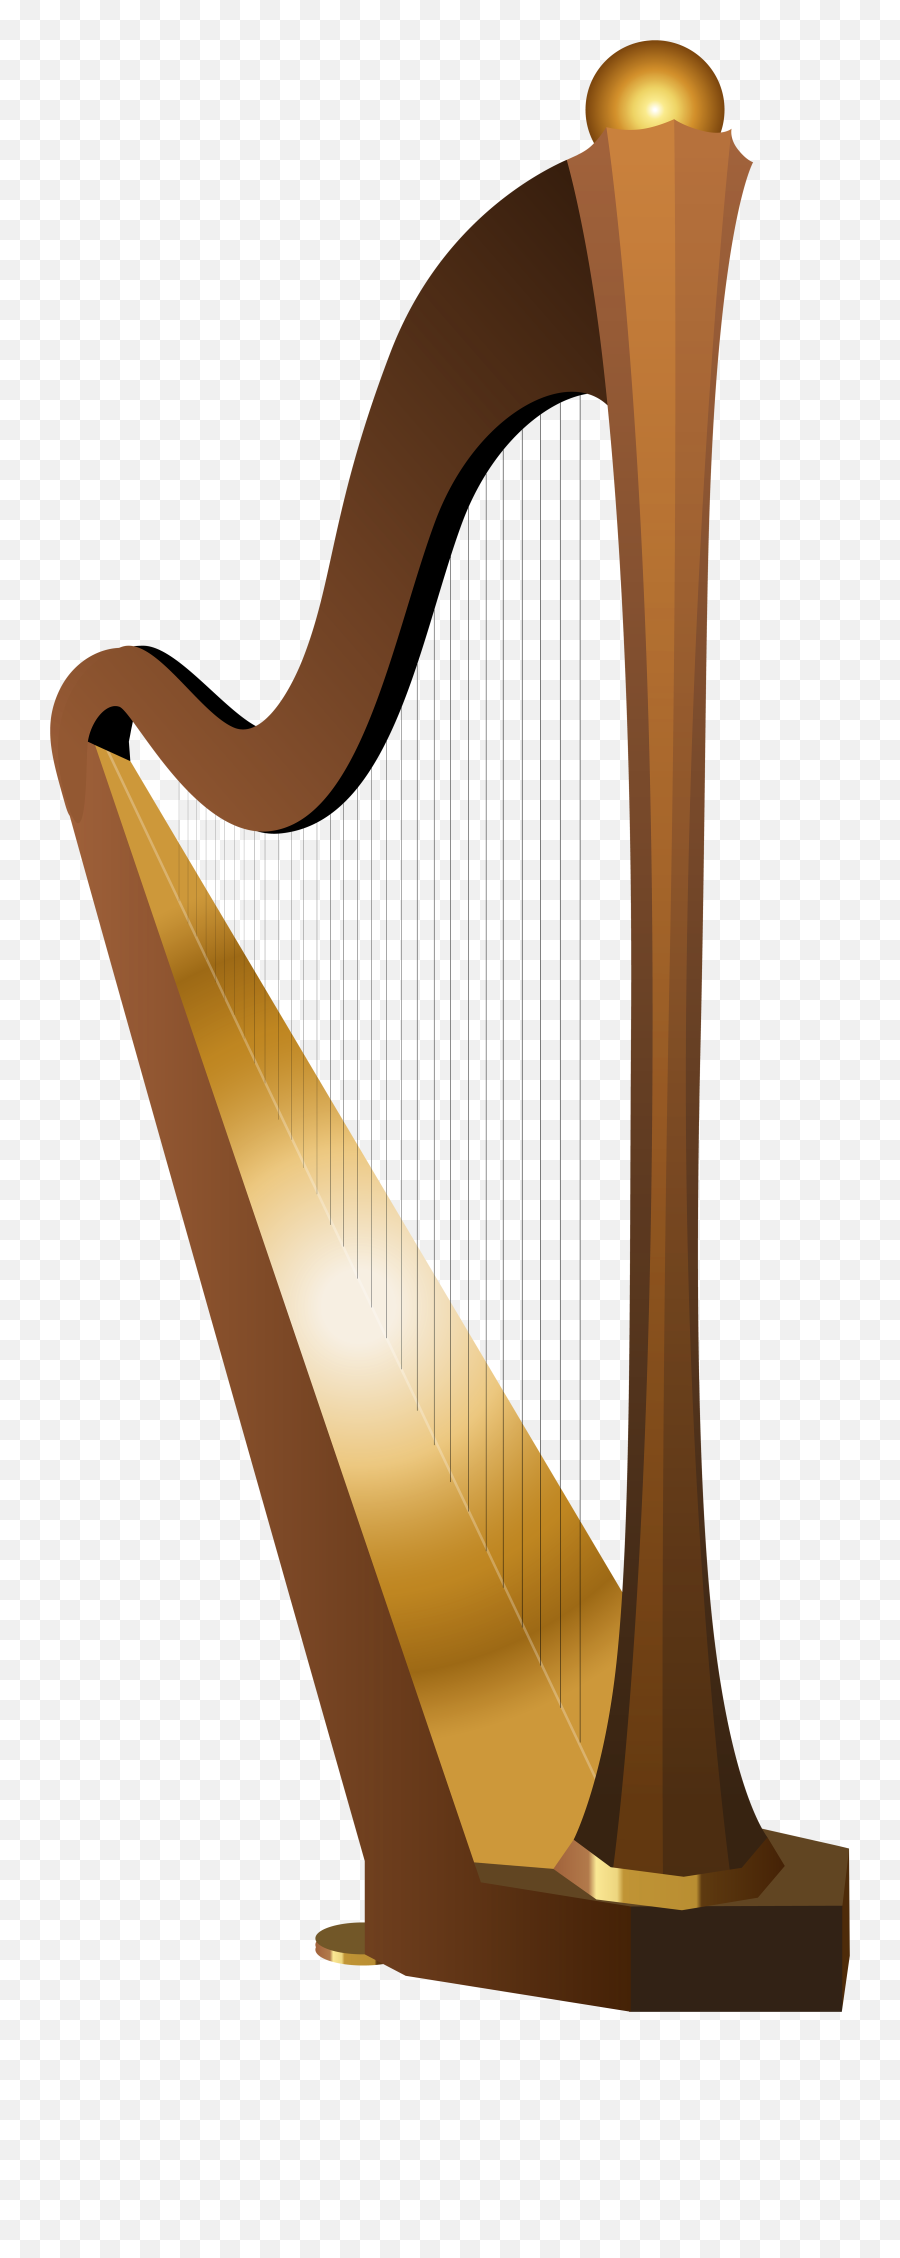 Download Harp Png Transparent Image - Harp With No Background,Harp Png